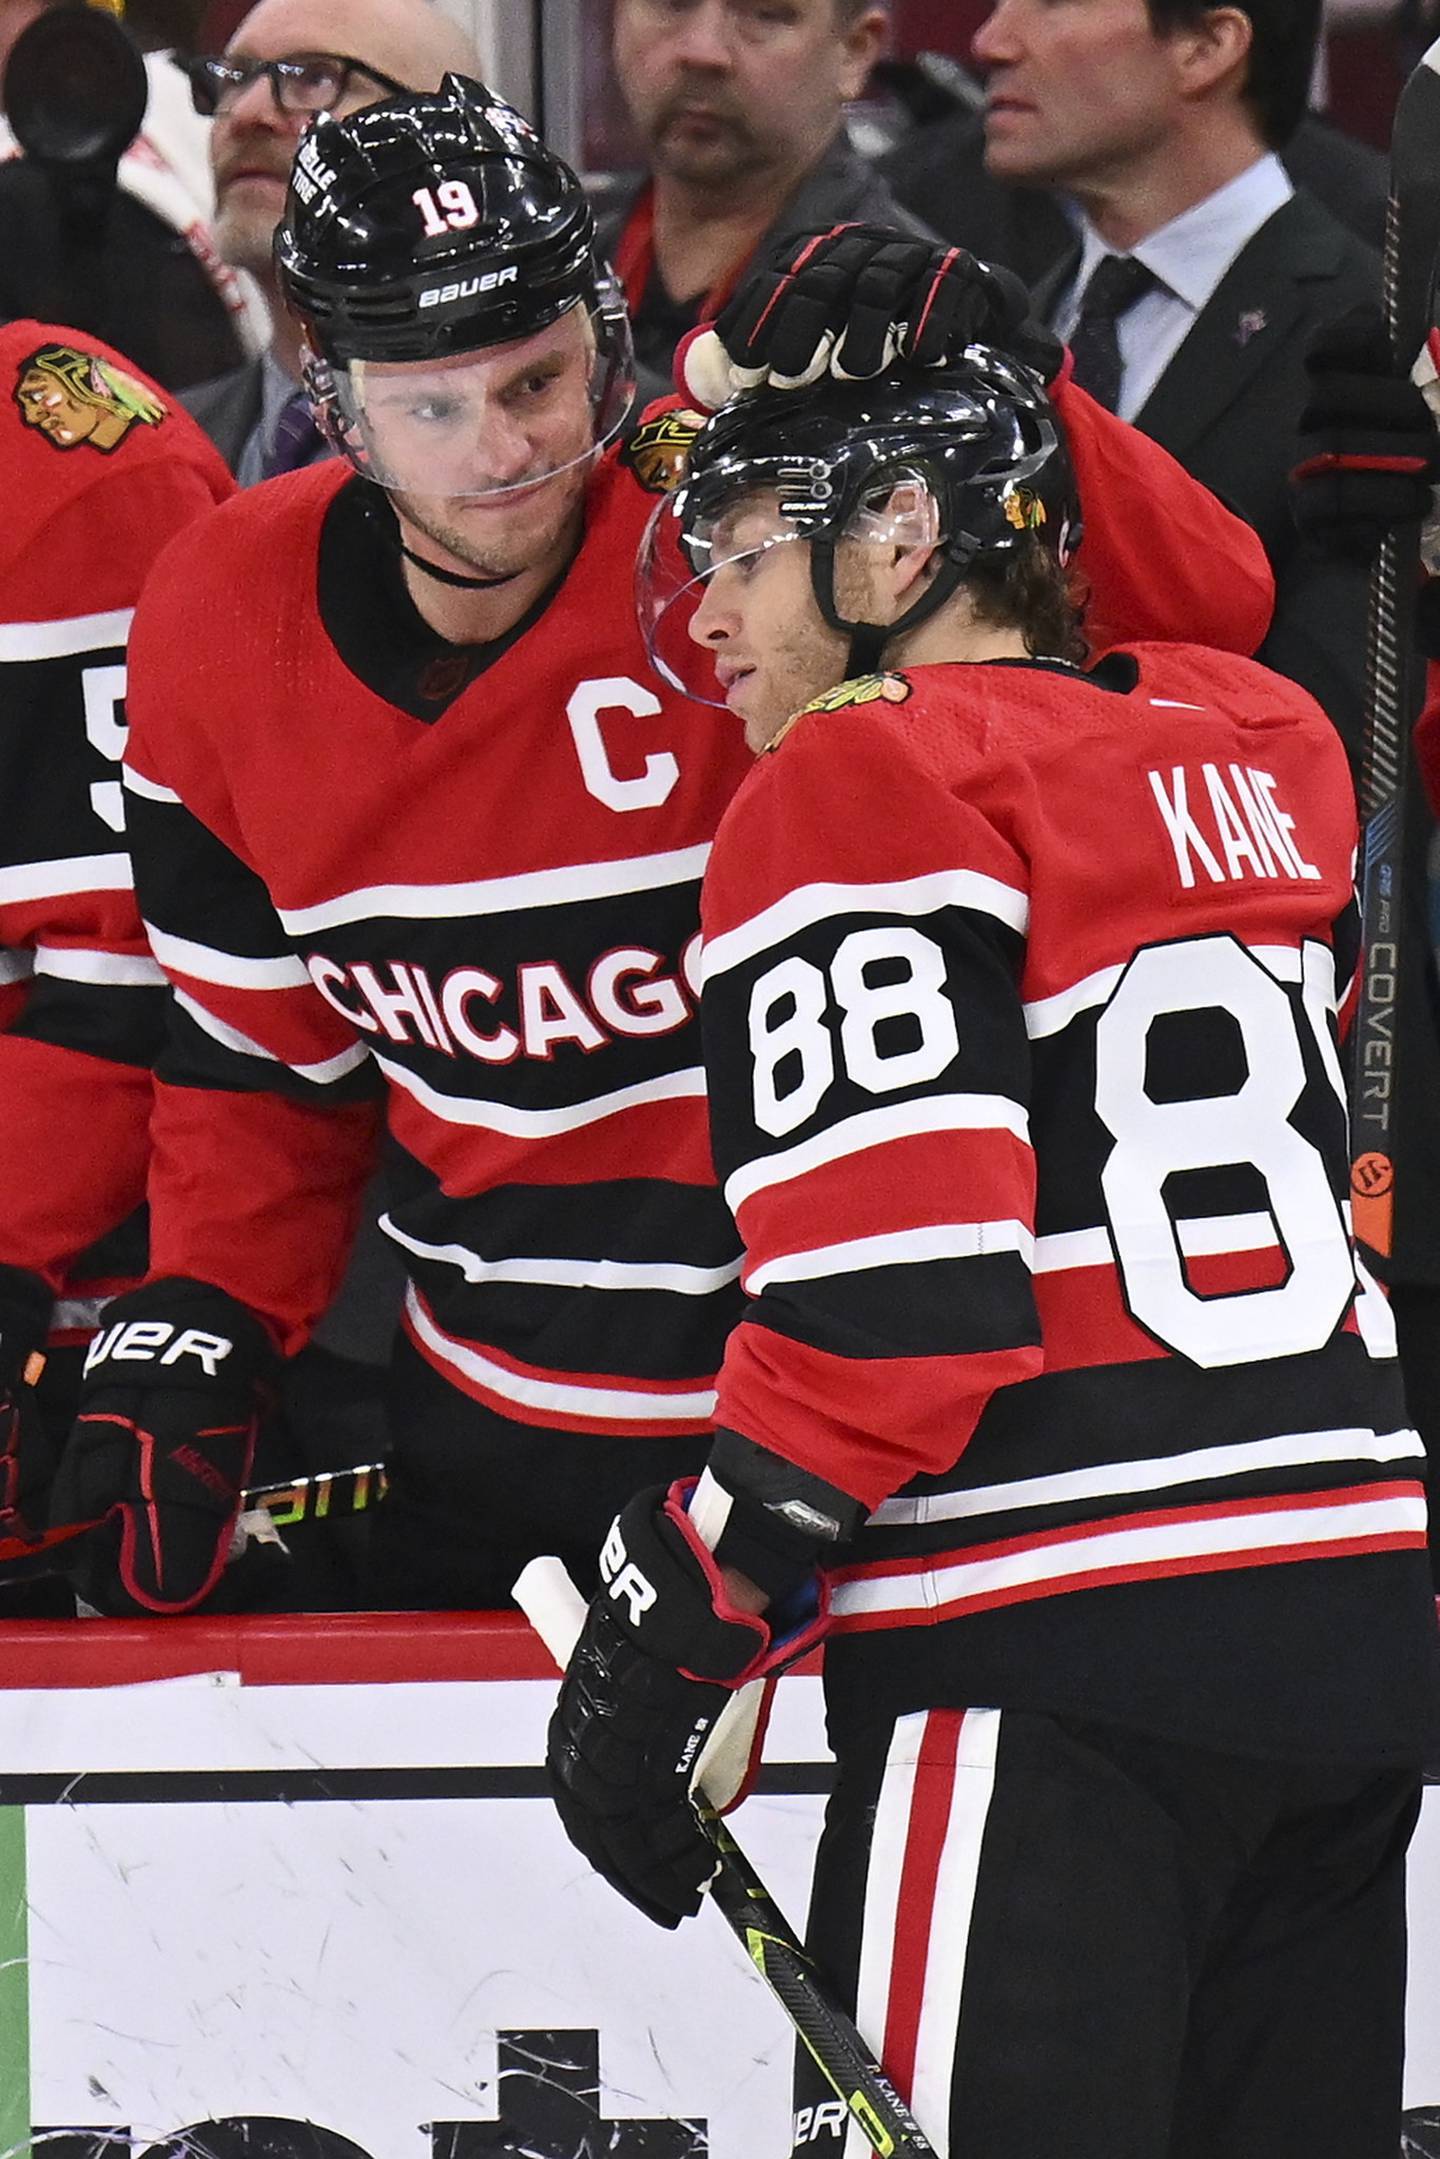 Jonathan Toews and Patrick Kane congratulate each other after being honored for playing their 1000th game together as teammates on Dec. 18, 2022 at United Center.